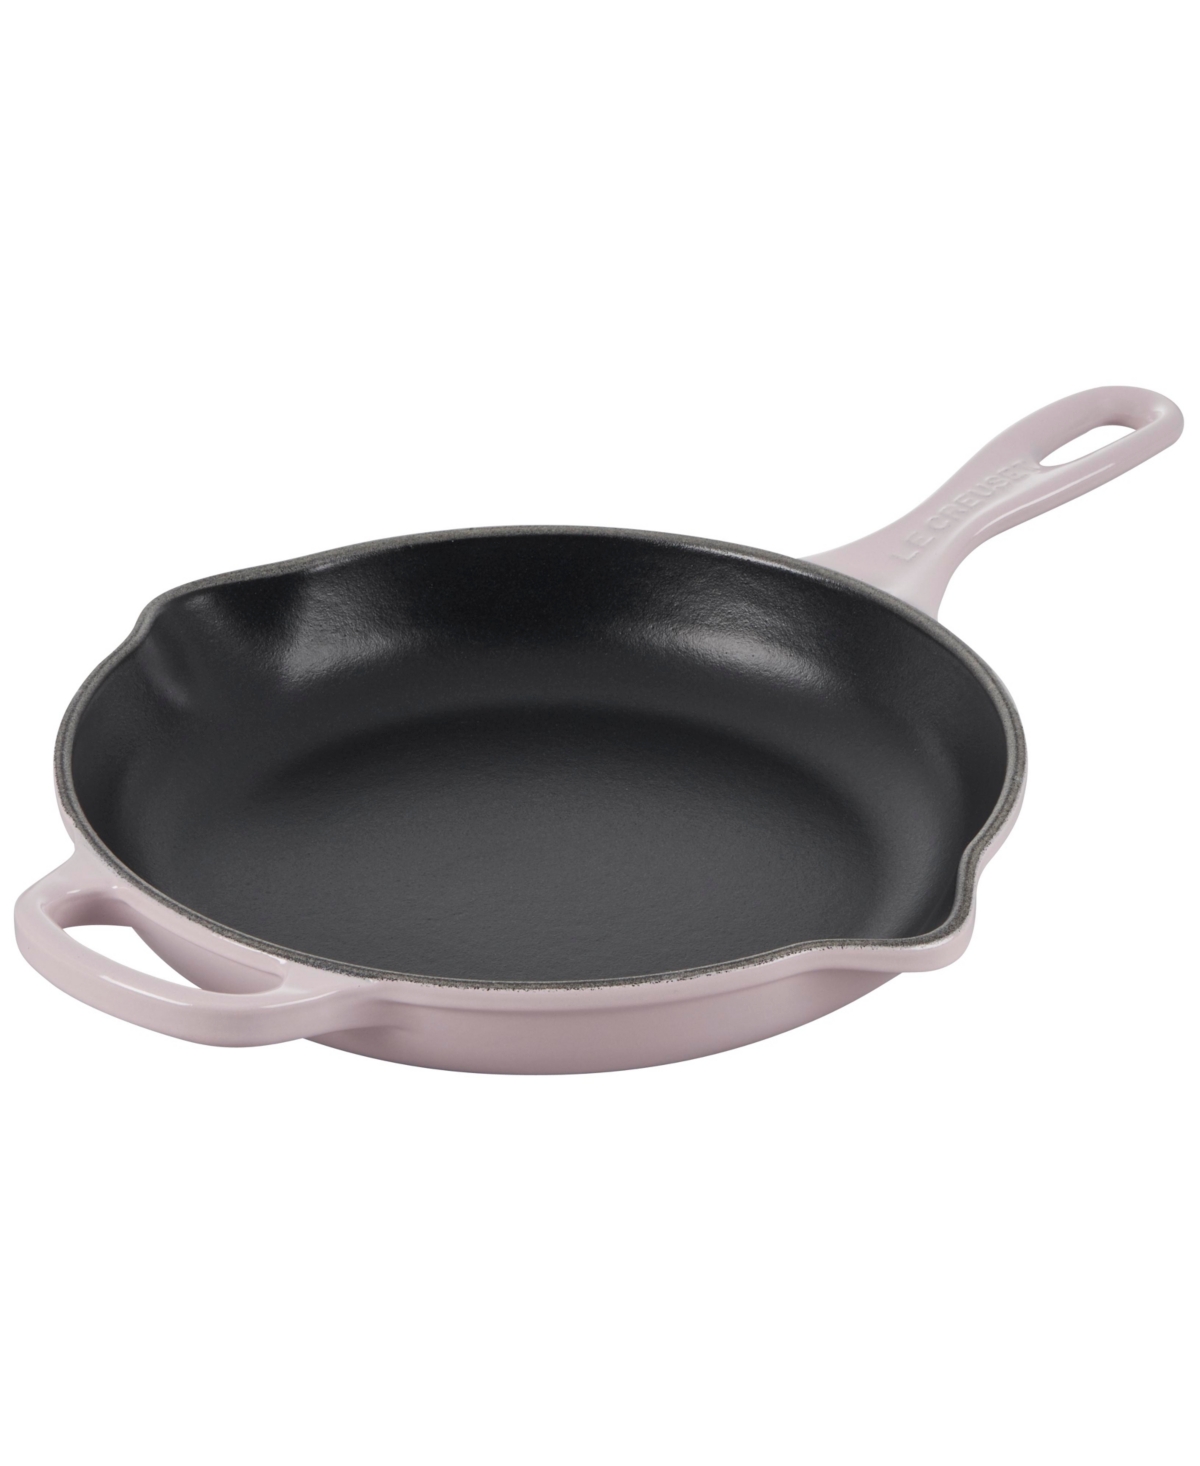 Le Creuset 9" Enameled Cast Iron Skillet With Helper Handle In Shallot